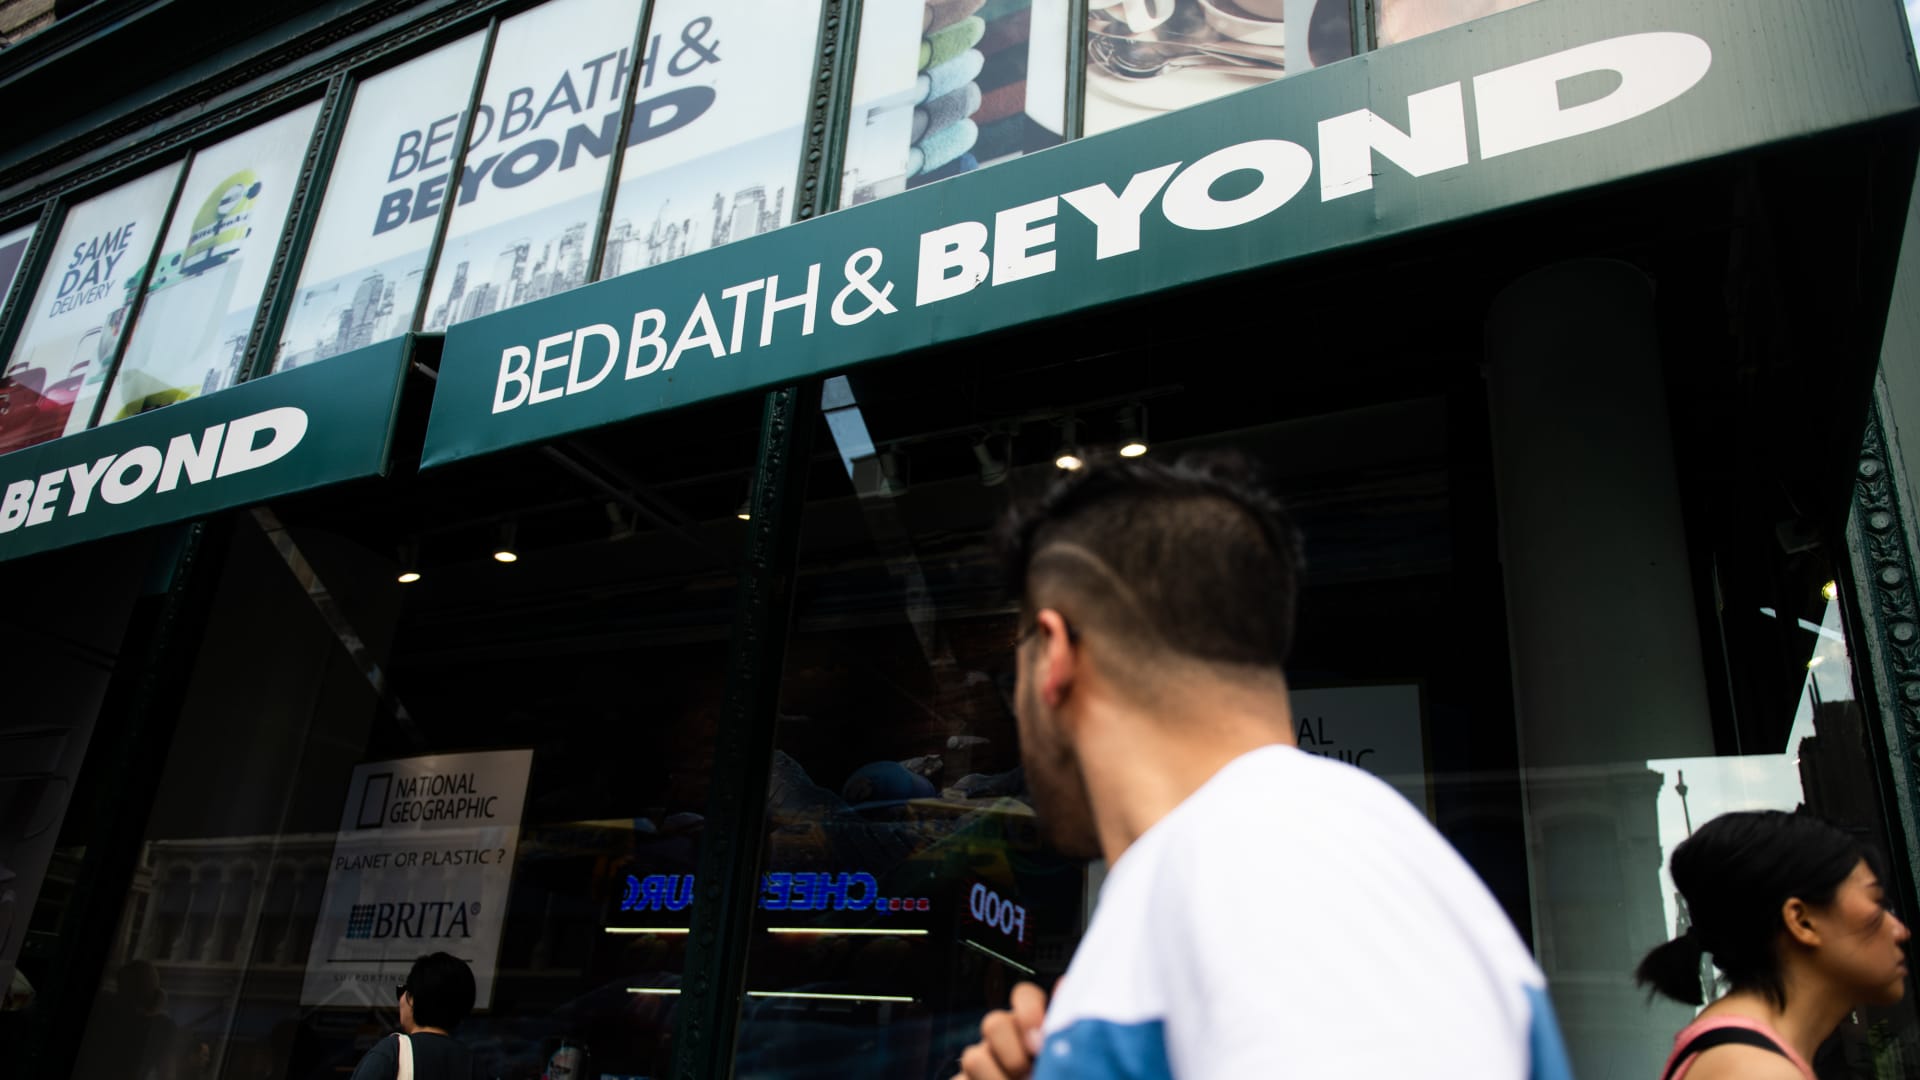 Bed Bath & Beyond surges again on Wednesday, continuing August meme rally